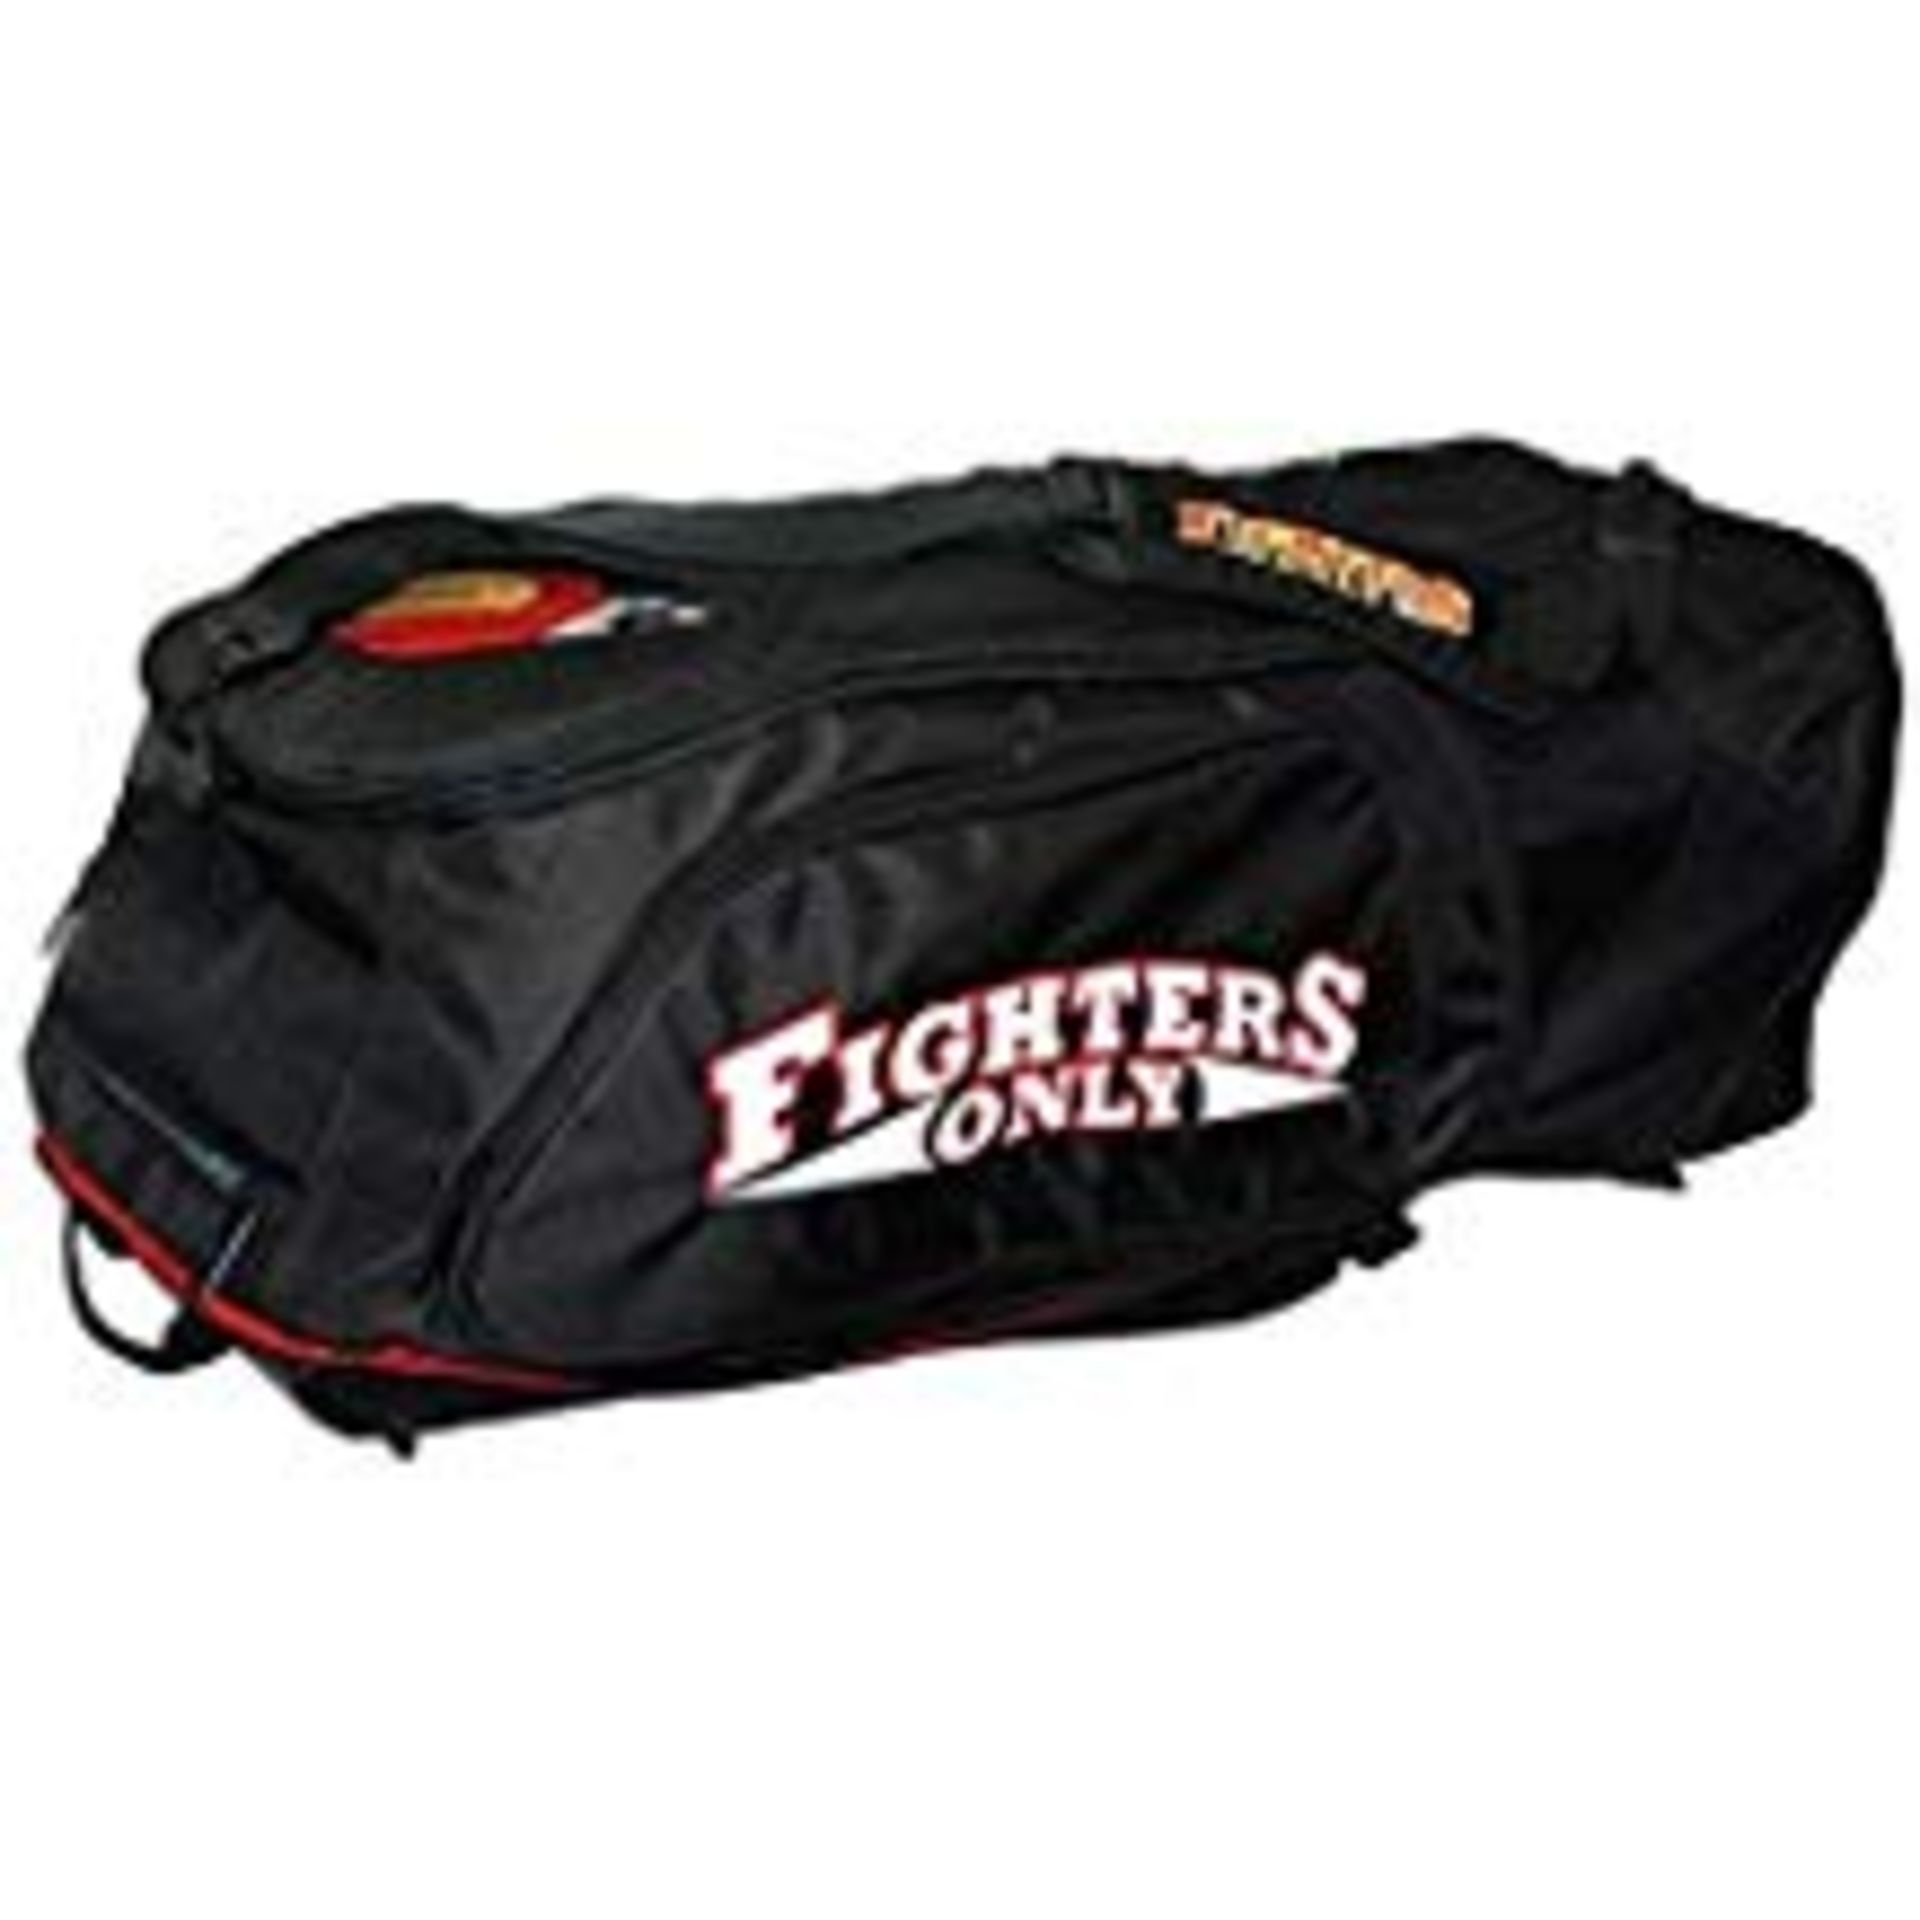 Approx. 32 Fighters Only Bags - Black - Image 2 of 2